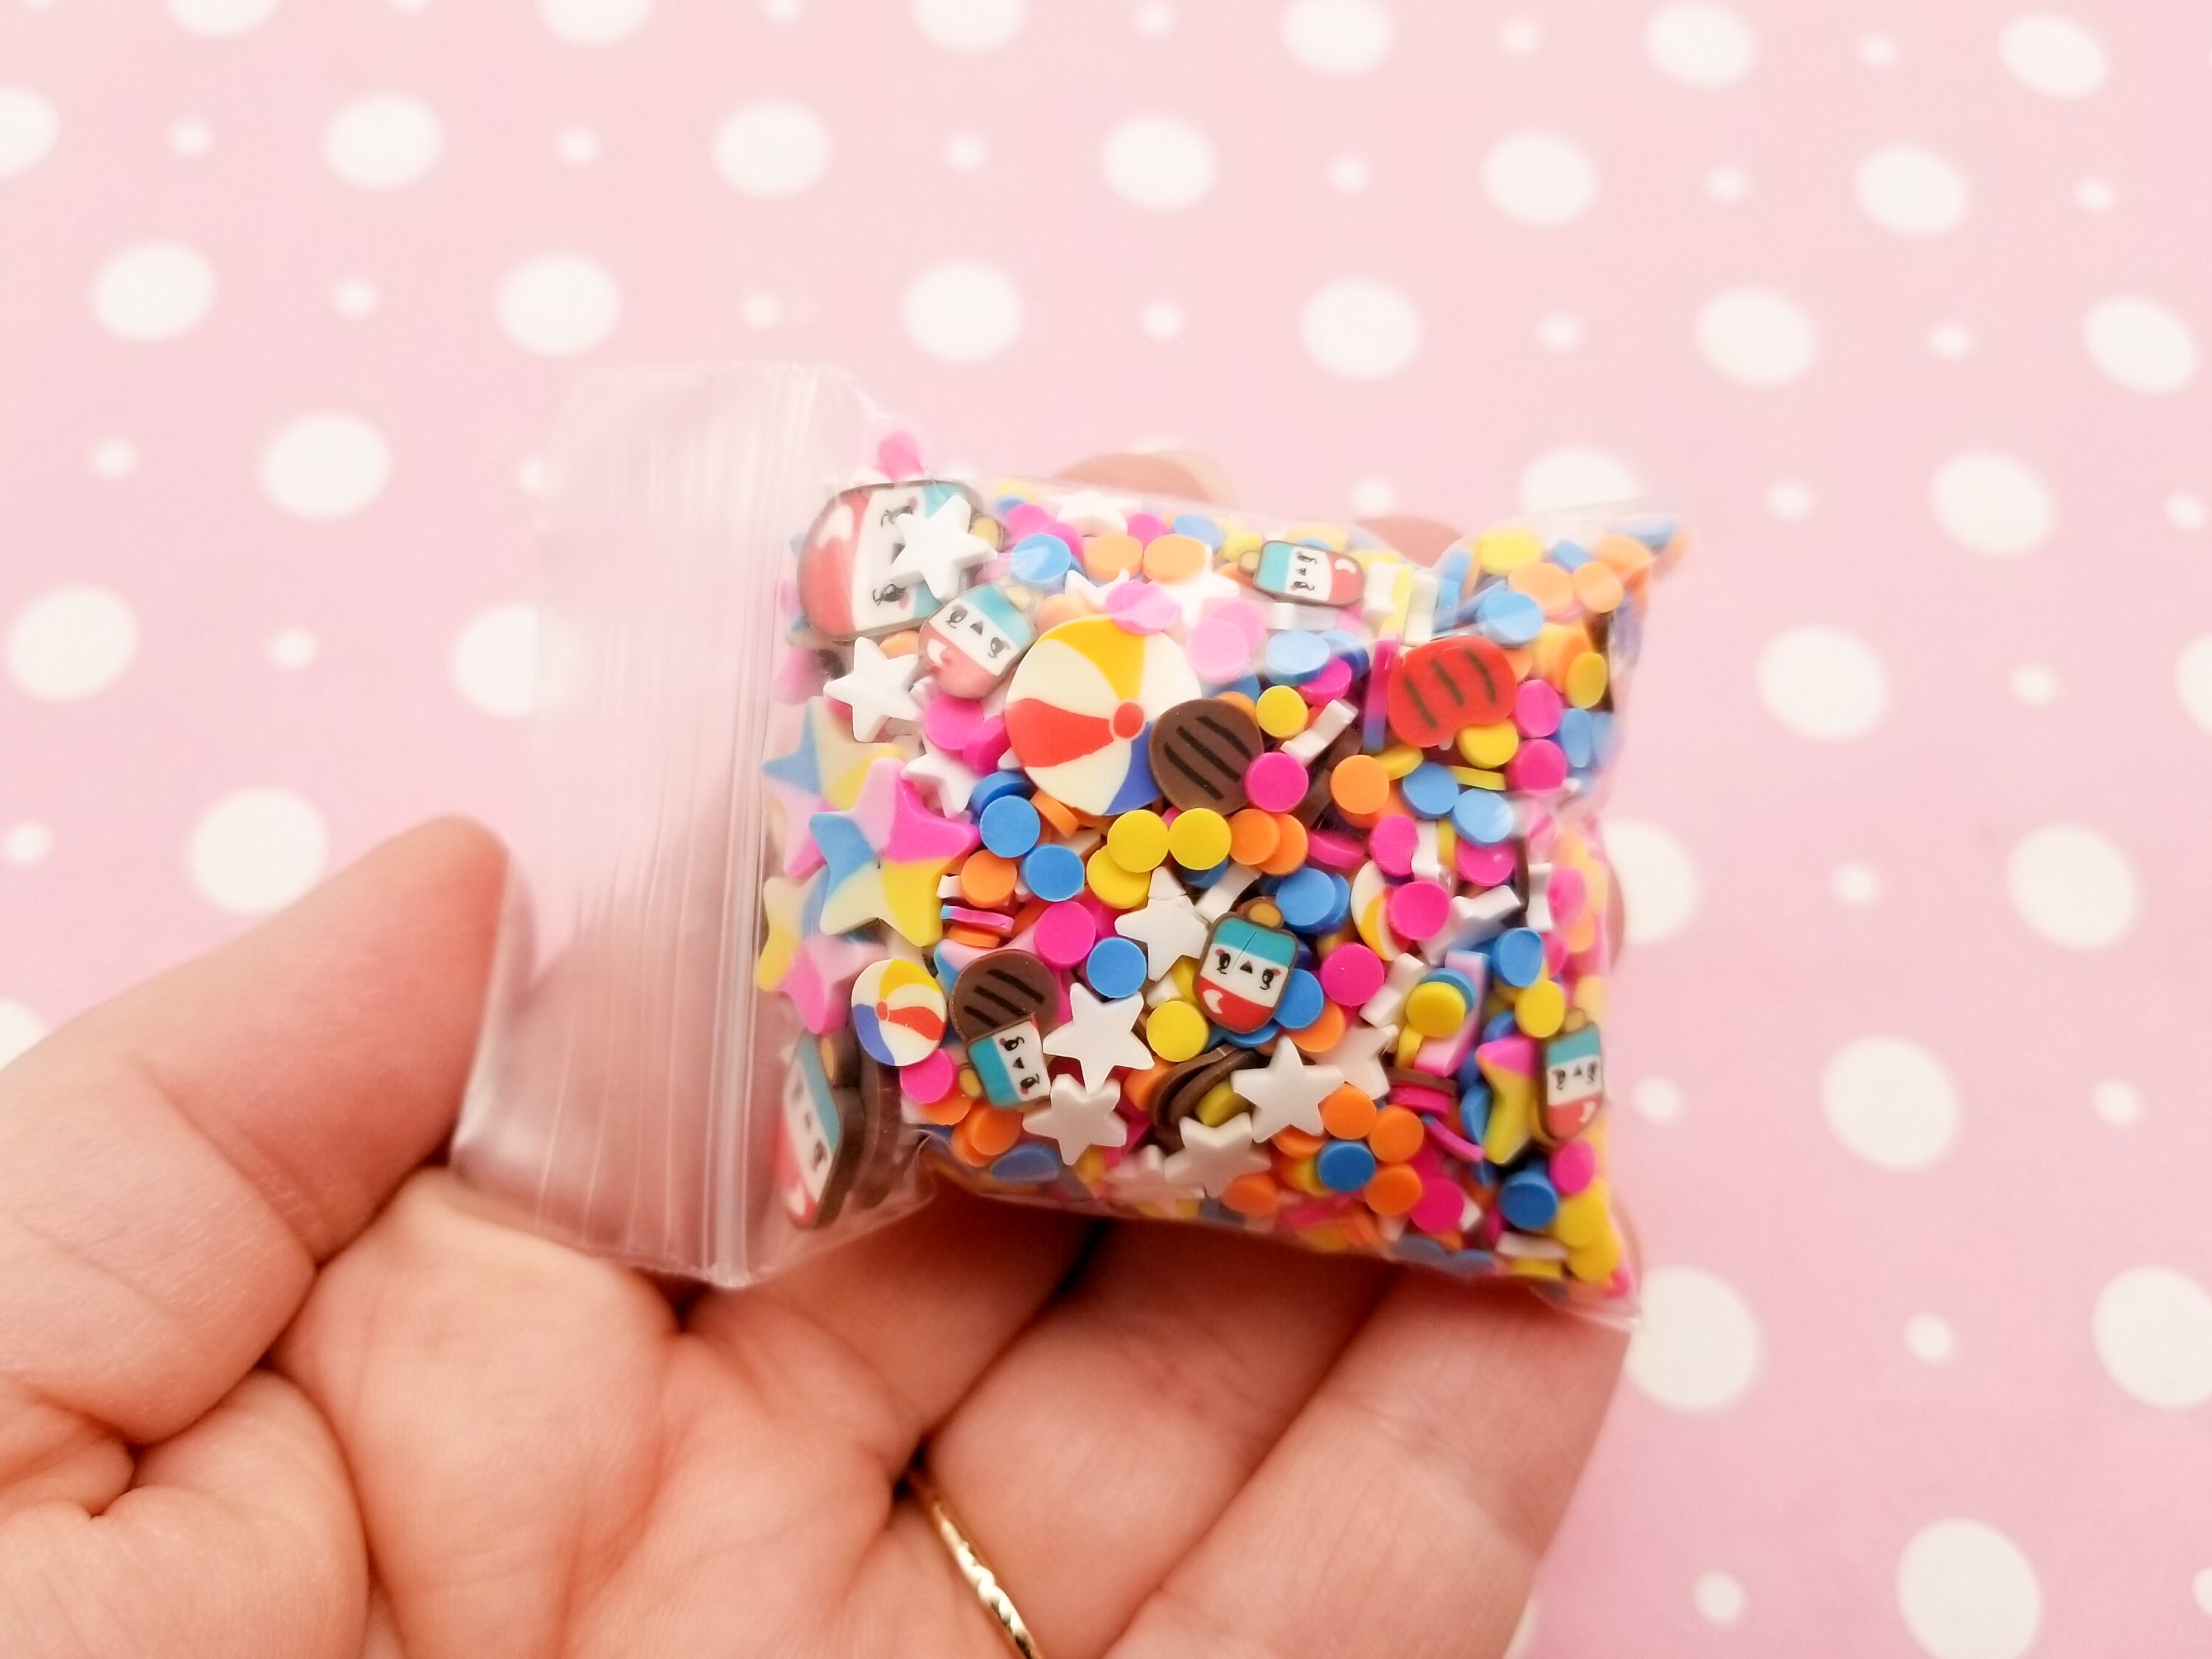 That Summer Something, Fake Polymer Clay Sprinkles With Resin Cab, Inedible  Rainbow Polymer Clay Sprinkles, Decoden Funfetti Jimmies E172 